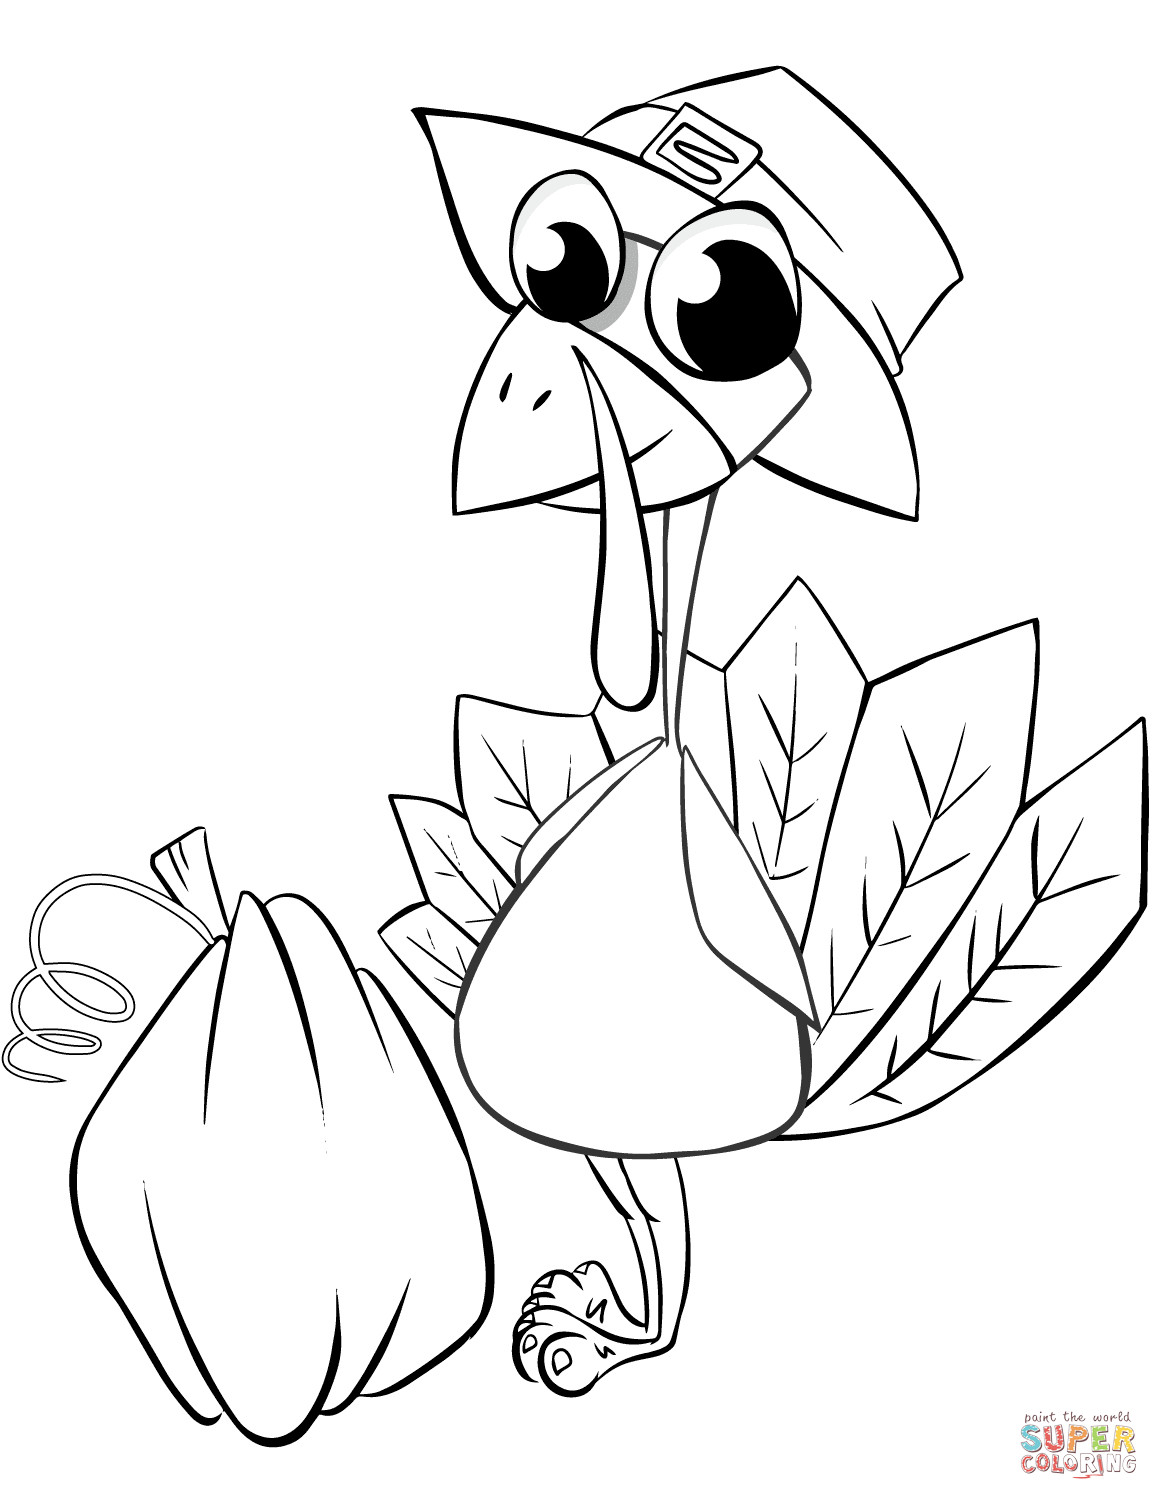 Thanksgiving Turkey Coloring Pages
 Thanksgiving Turkey with Pumpkin coloring page